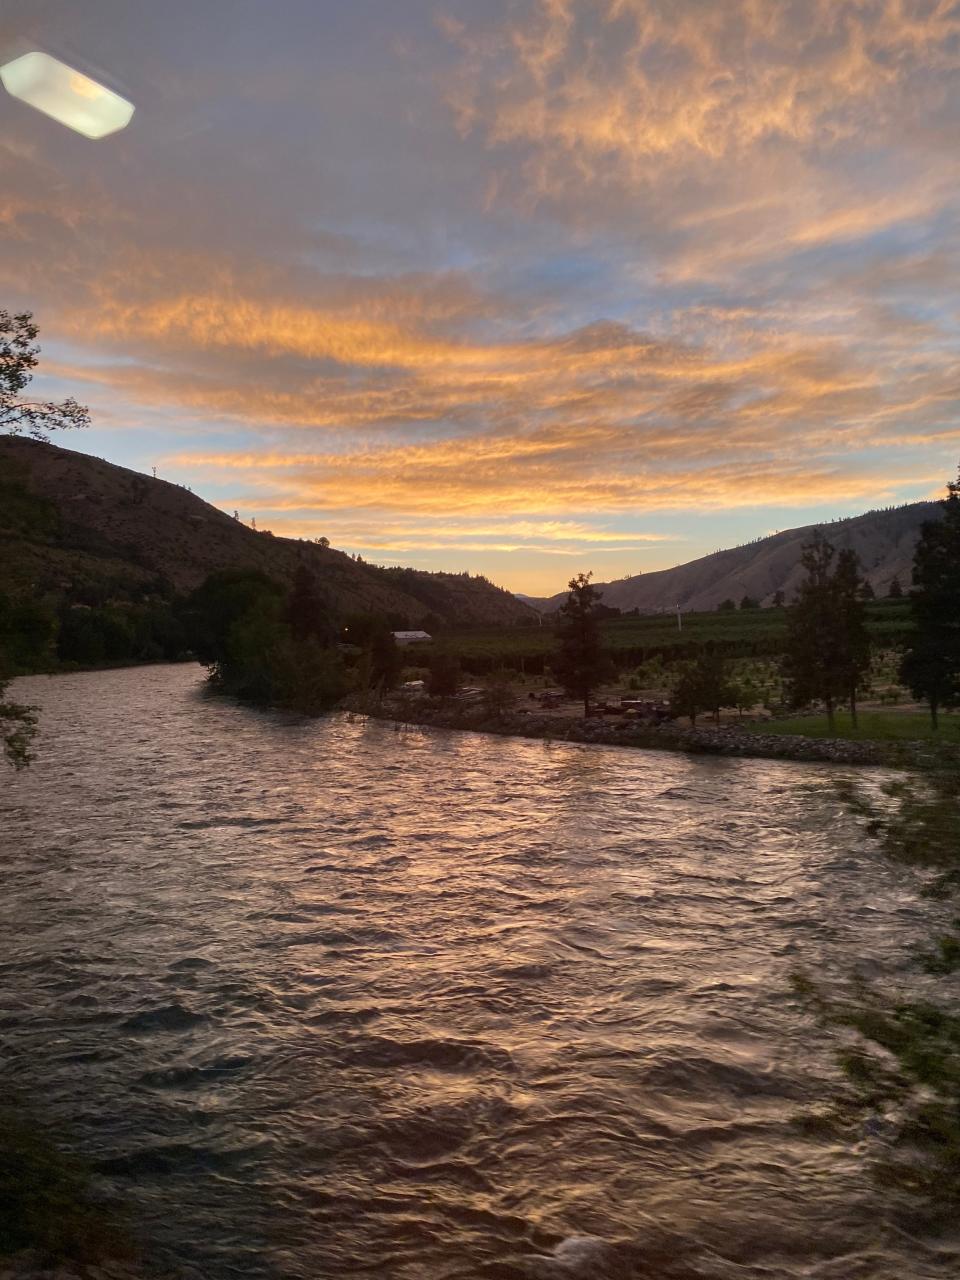 Sunset by the Wenatchee River in Washington, as captured by a fellow passenger.